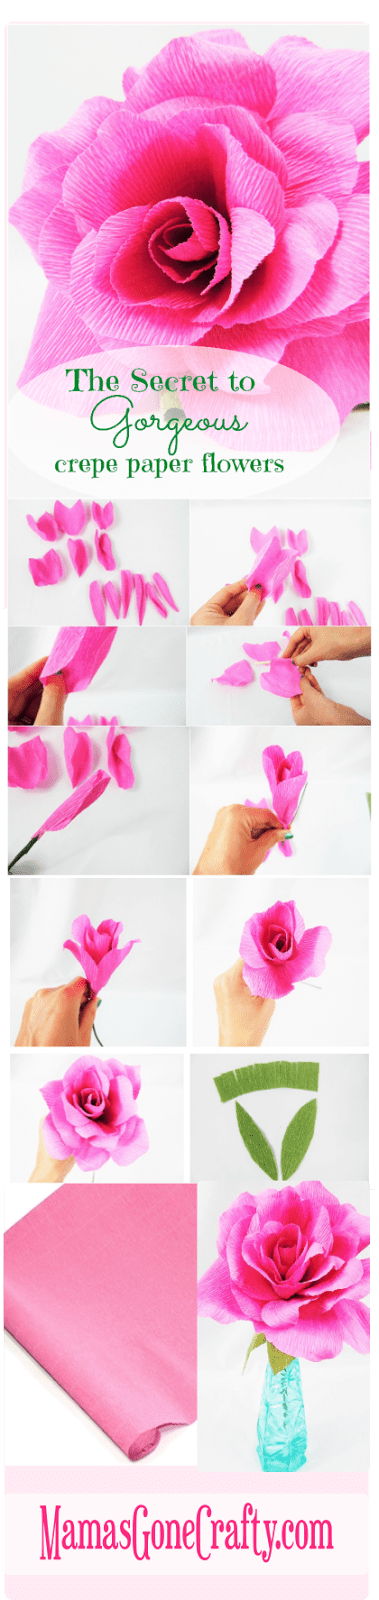 A collage of images showing how to make crepe paper roses step by step with pink crepe paper.